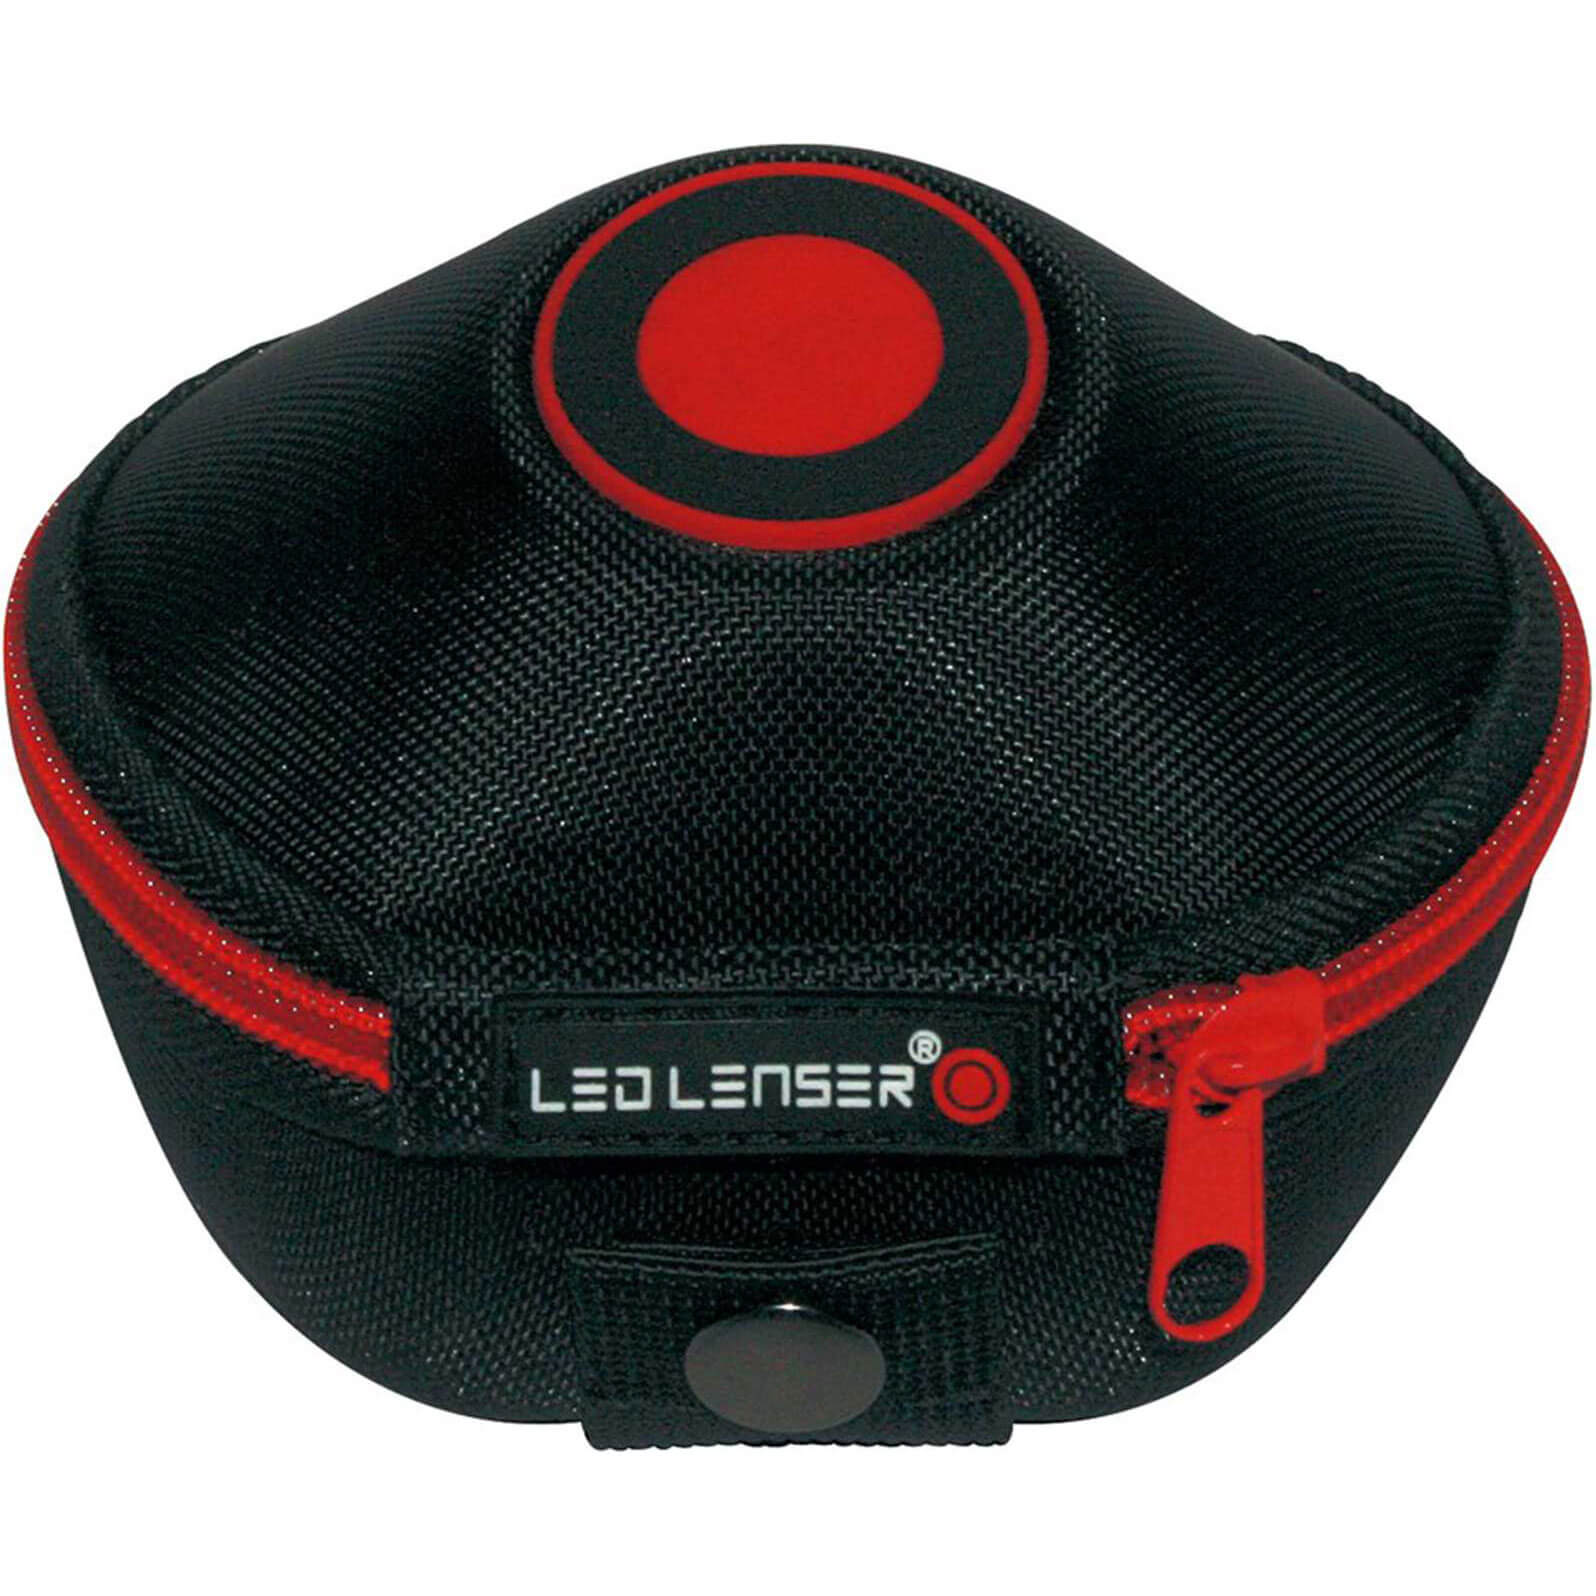 Image of LED Lenser Head Torch Storage Pouch for H3.2, H6R, H7R.2, iH3, iH6, iH6R and iH7R CRI